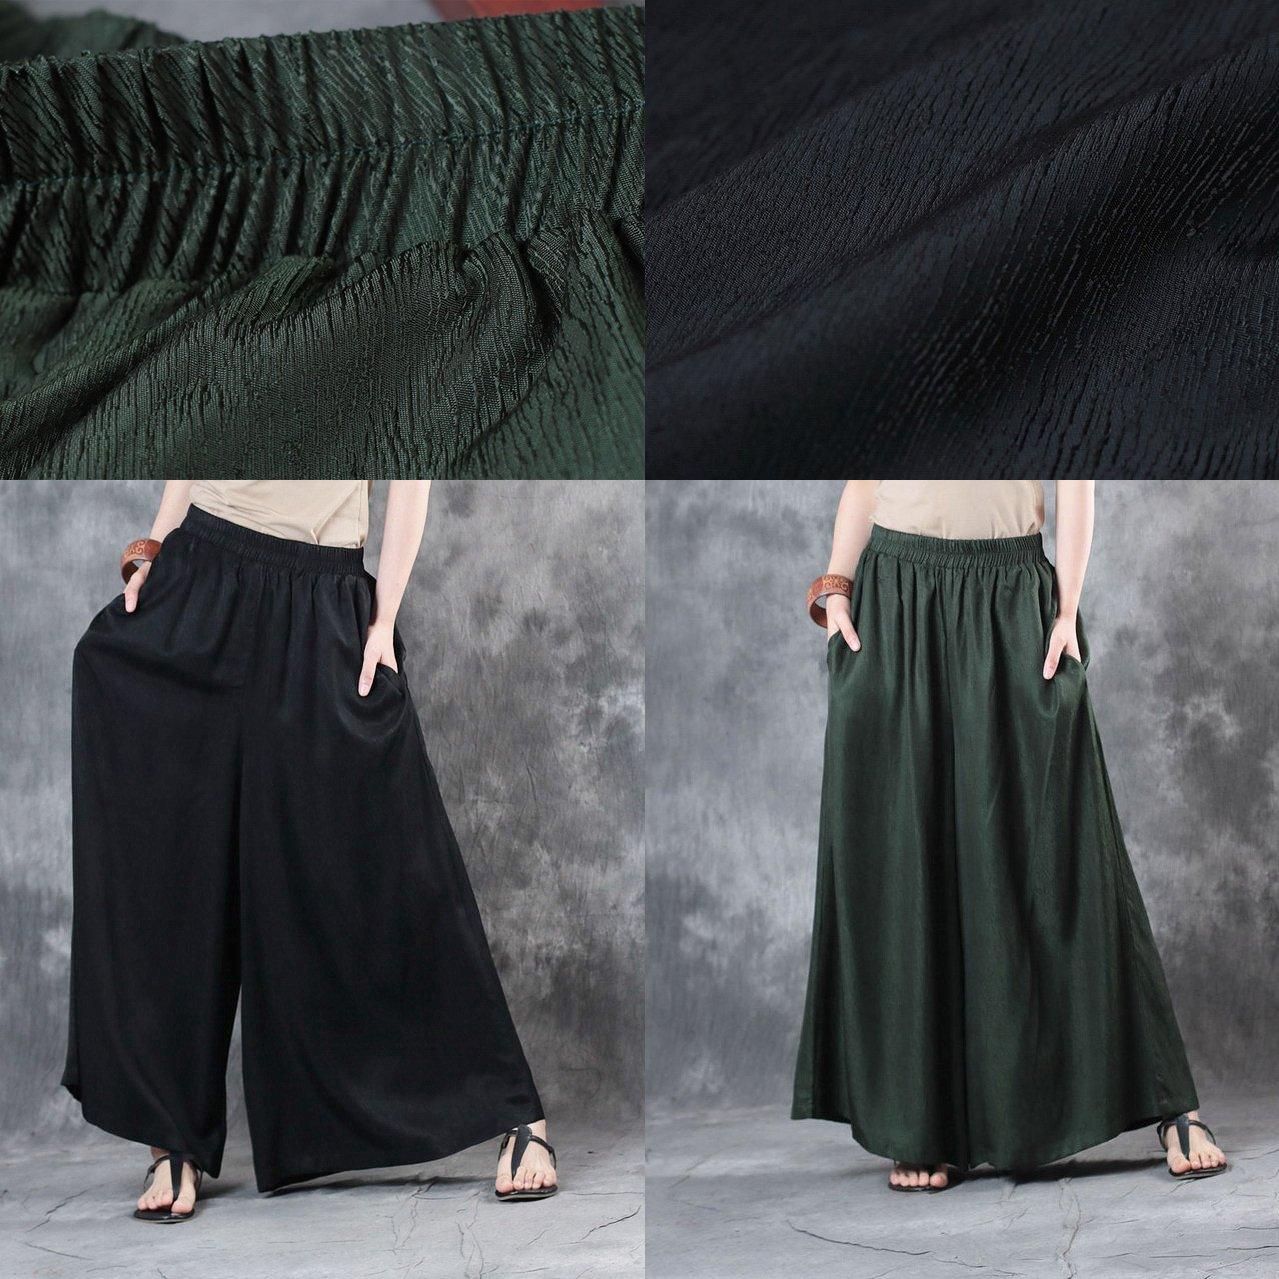 Free Shipping-New Olive Casual Draping Silk Pants Skirt Vintage Elastic Waist Wide Leg Pants - Omychic